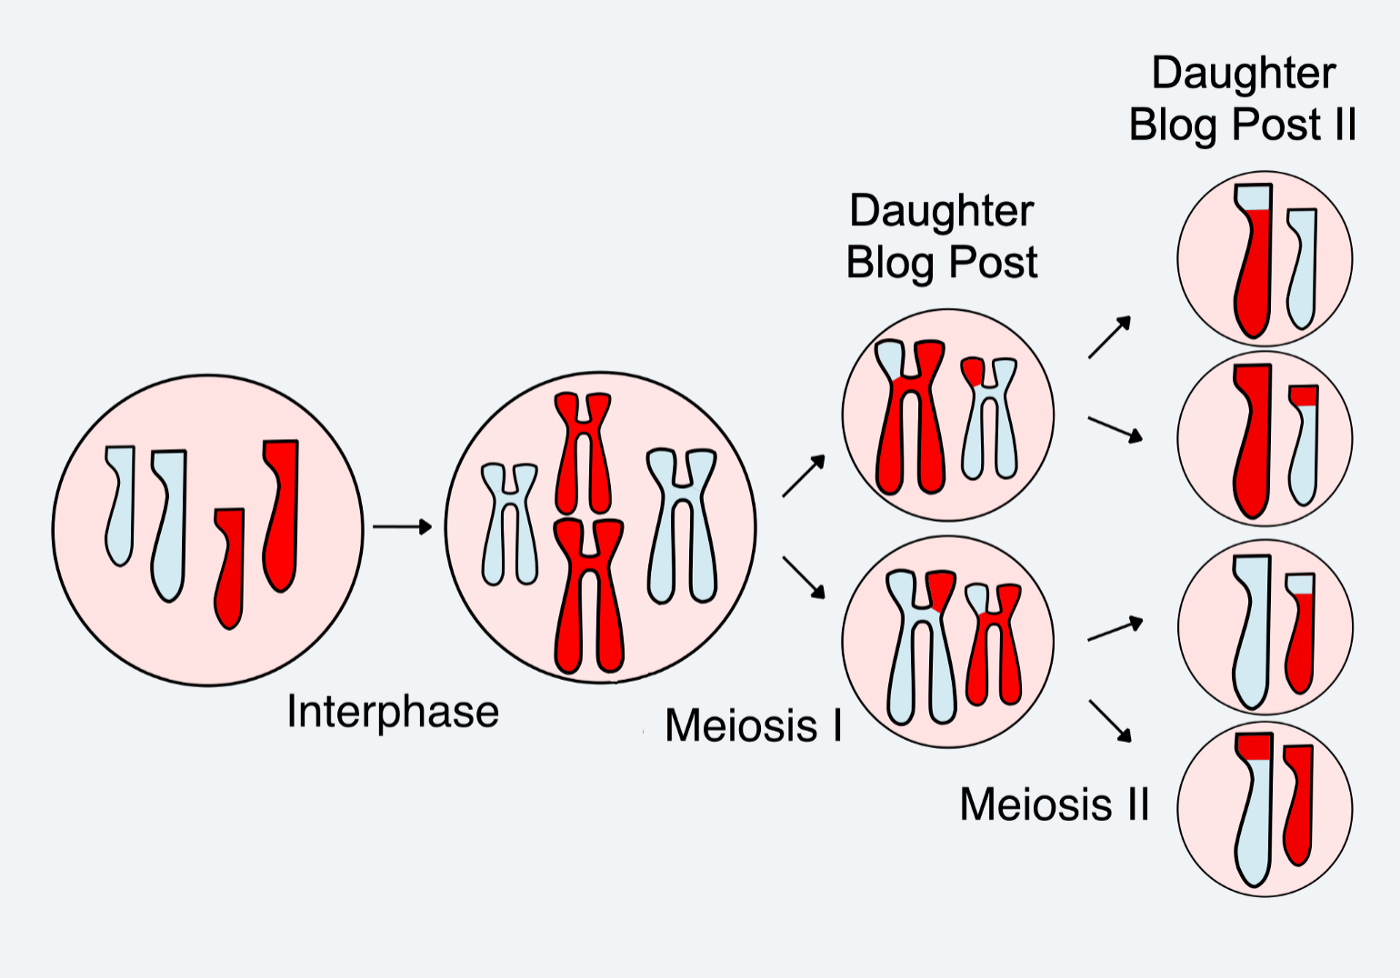 Diagram depicting cell divison by meiosis but the "daughters" are labelled "Daughter Blog Post" and the next generation "Daughter Blog Post II."